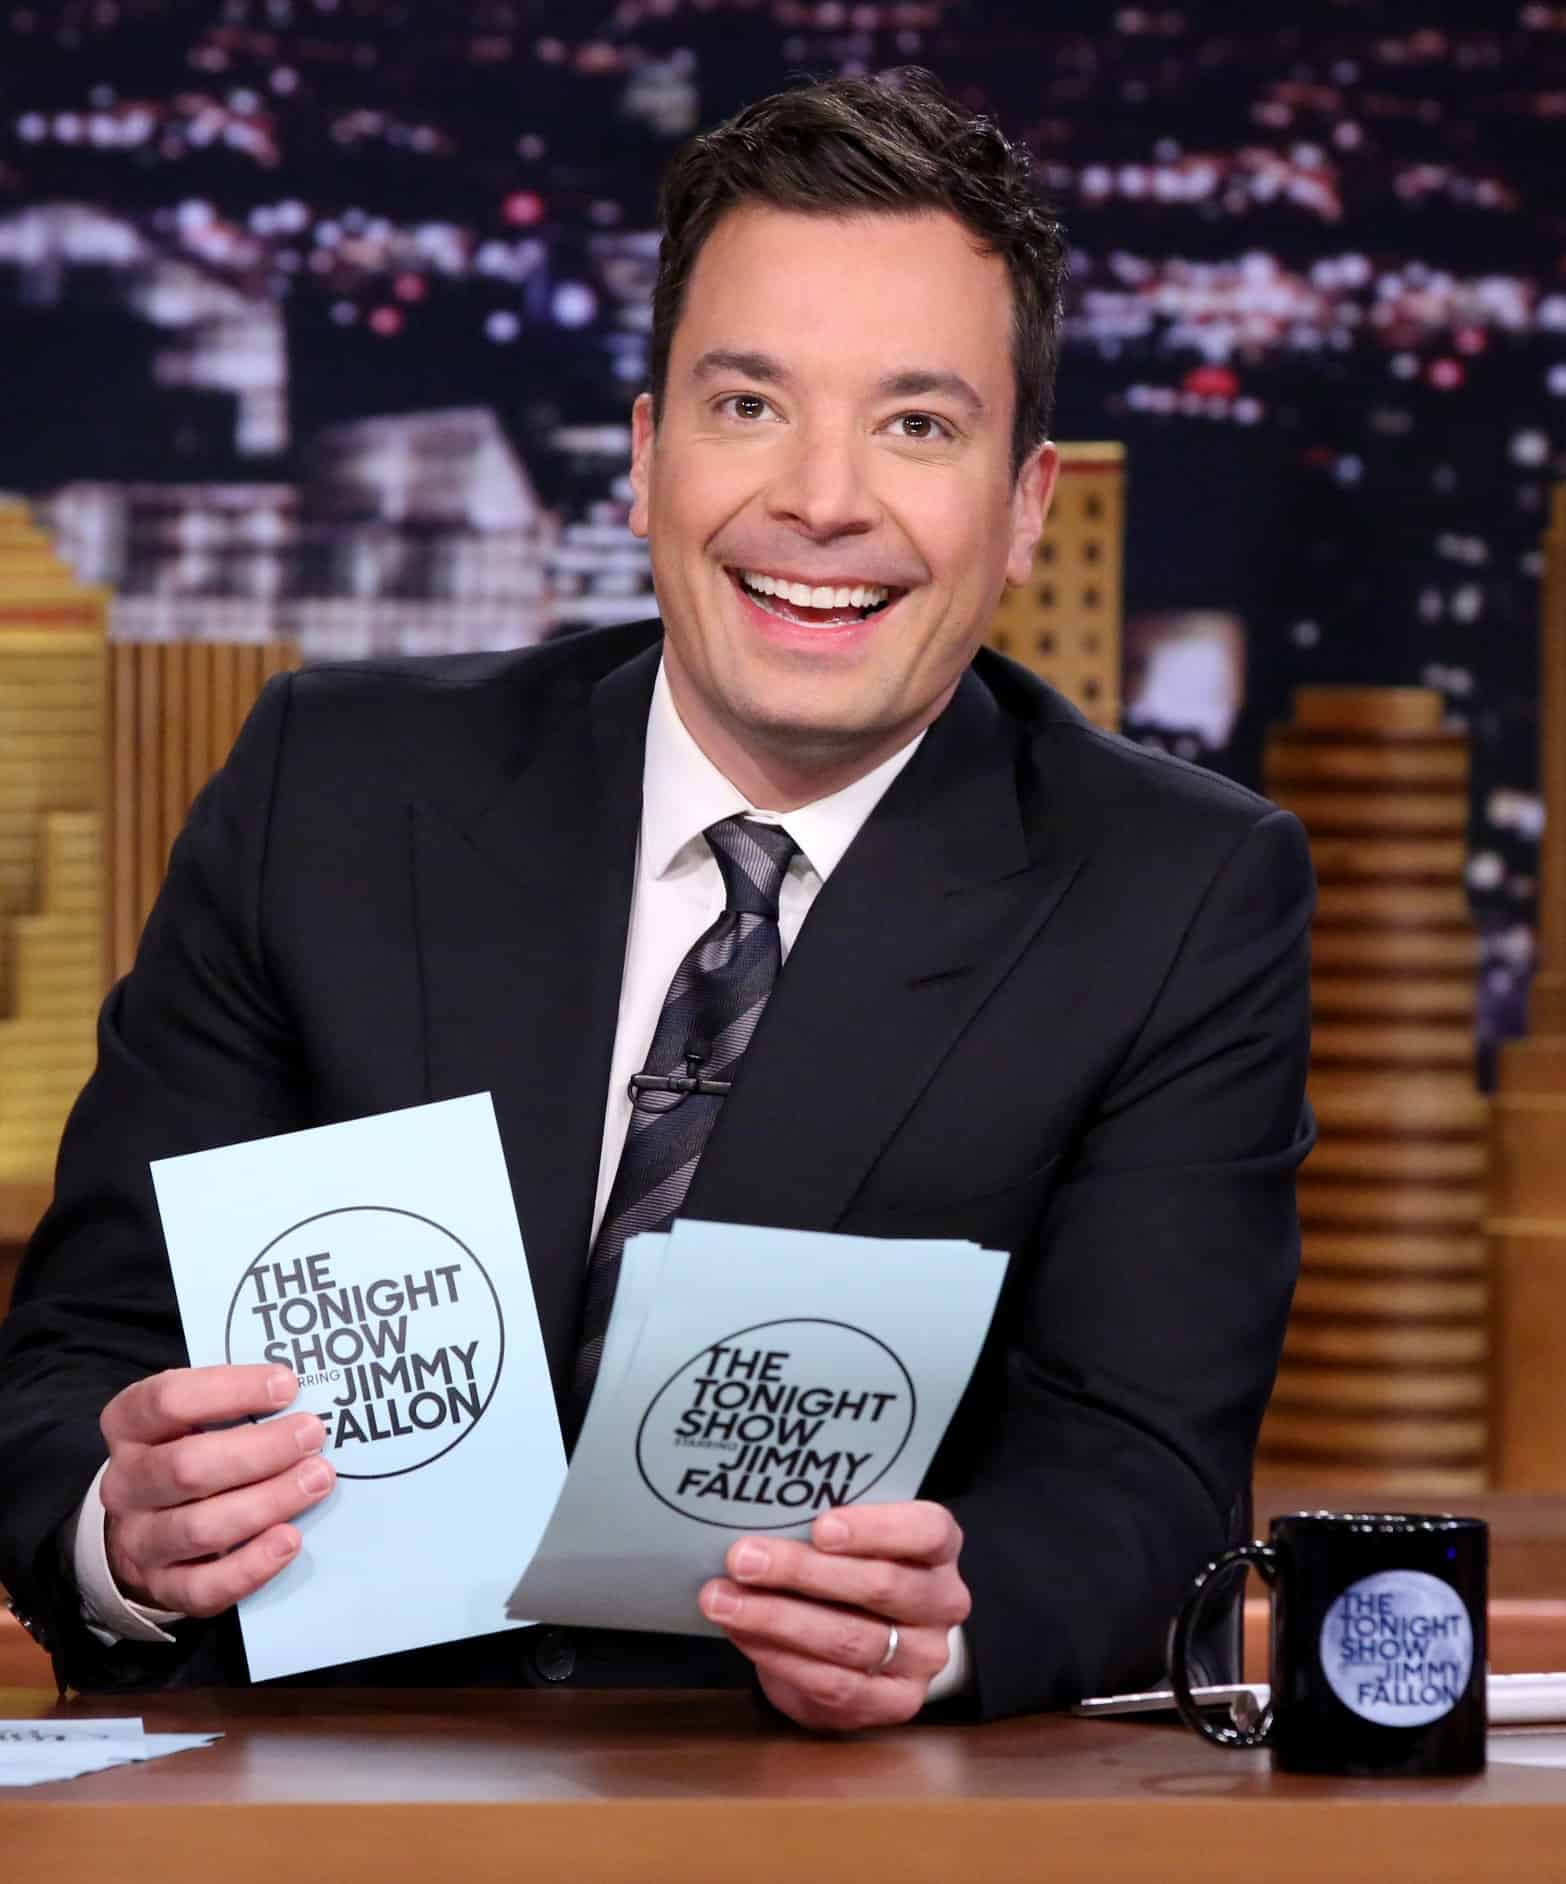 Jimmy Fallon took over as the new host of "The Tonight Show" in 2013